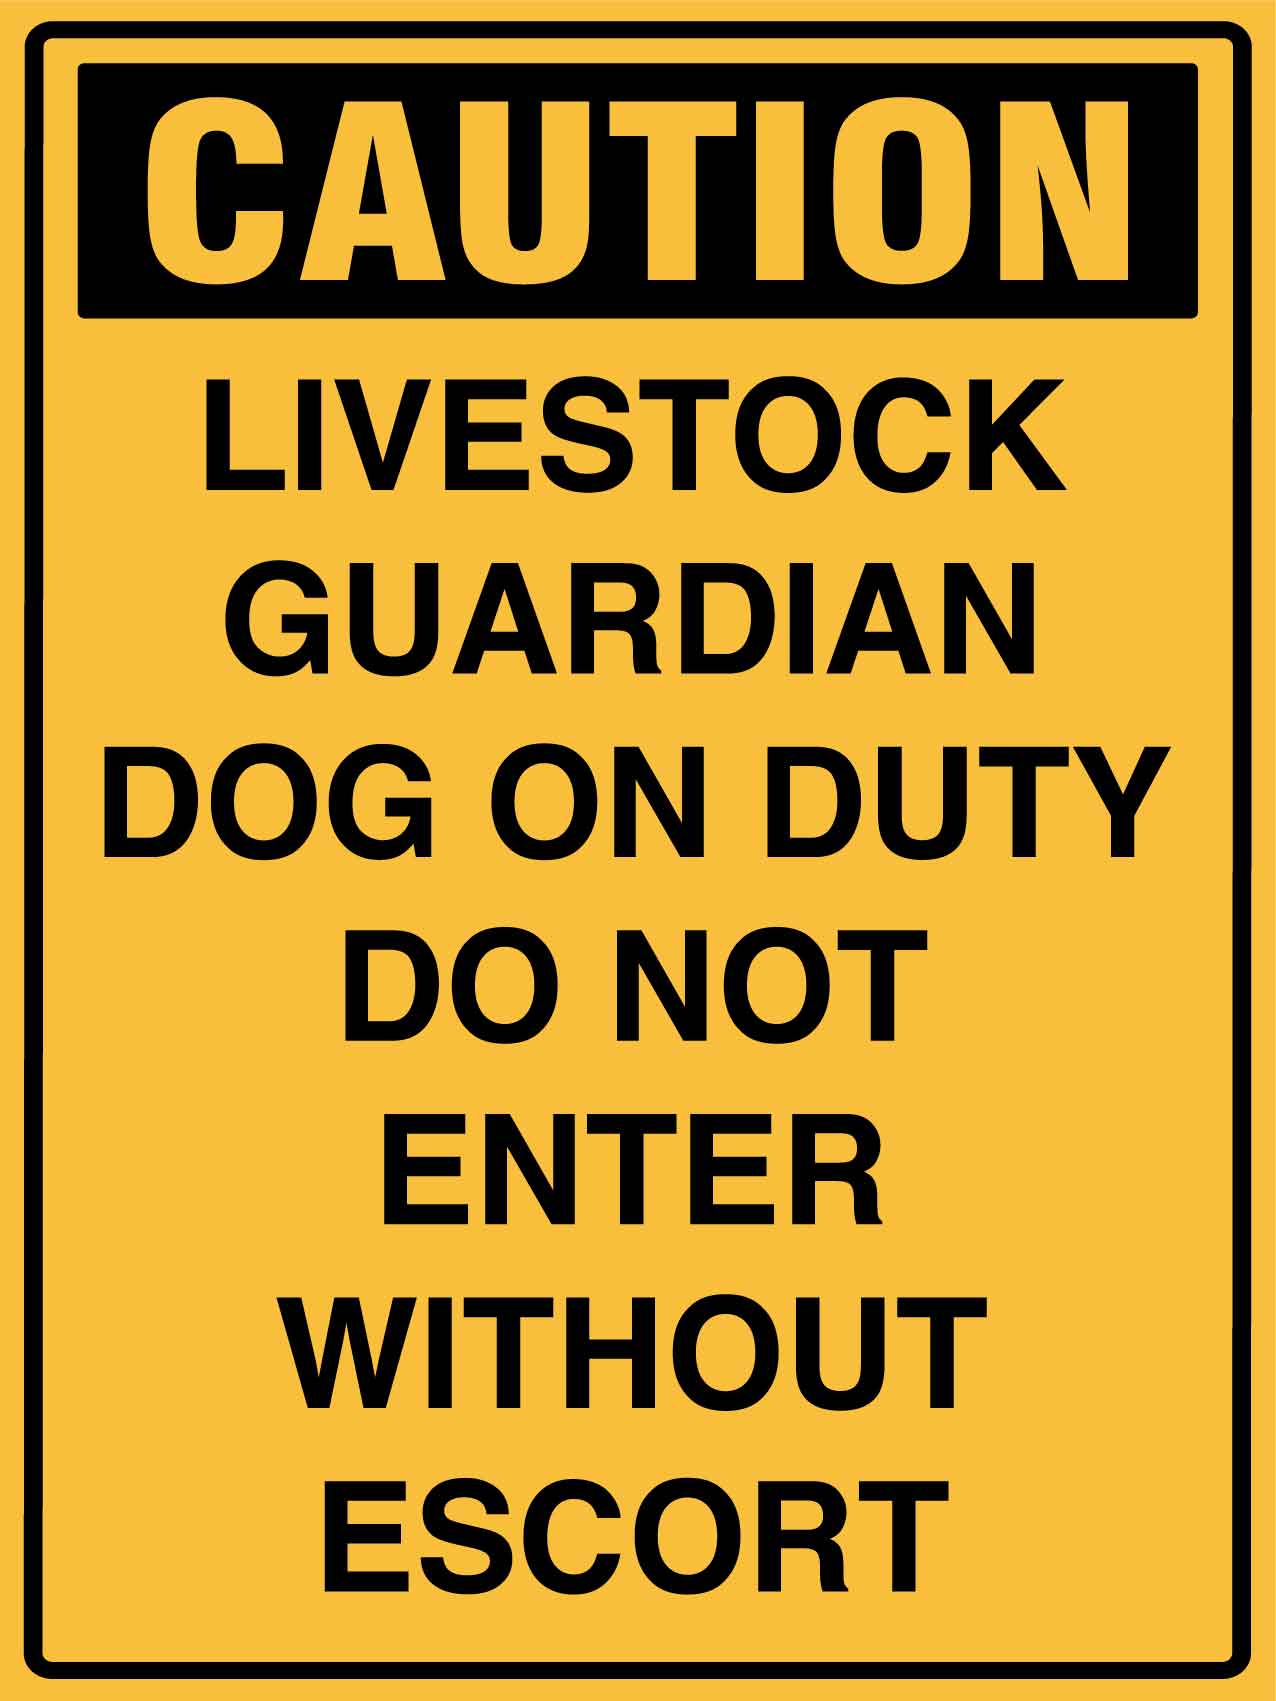 Caution Livestock Guardian Dog on Duty Do Not Enter Without Escort Sign